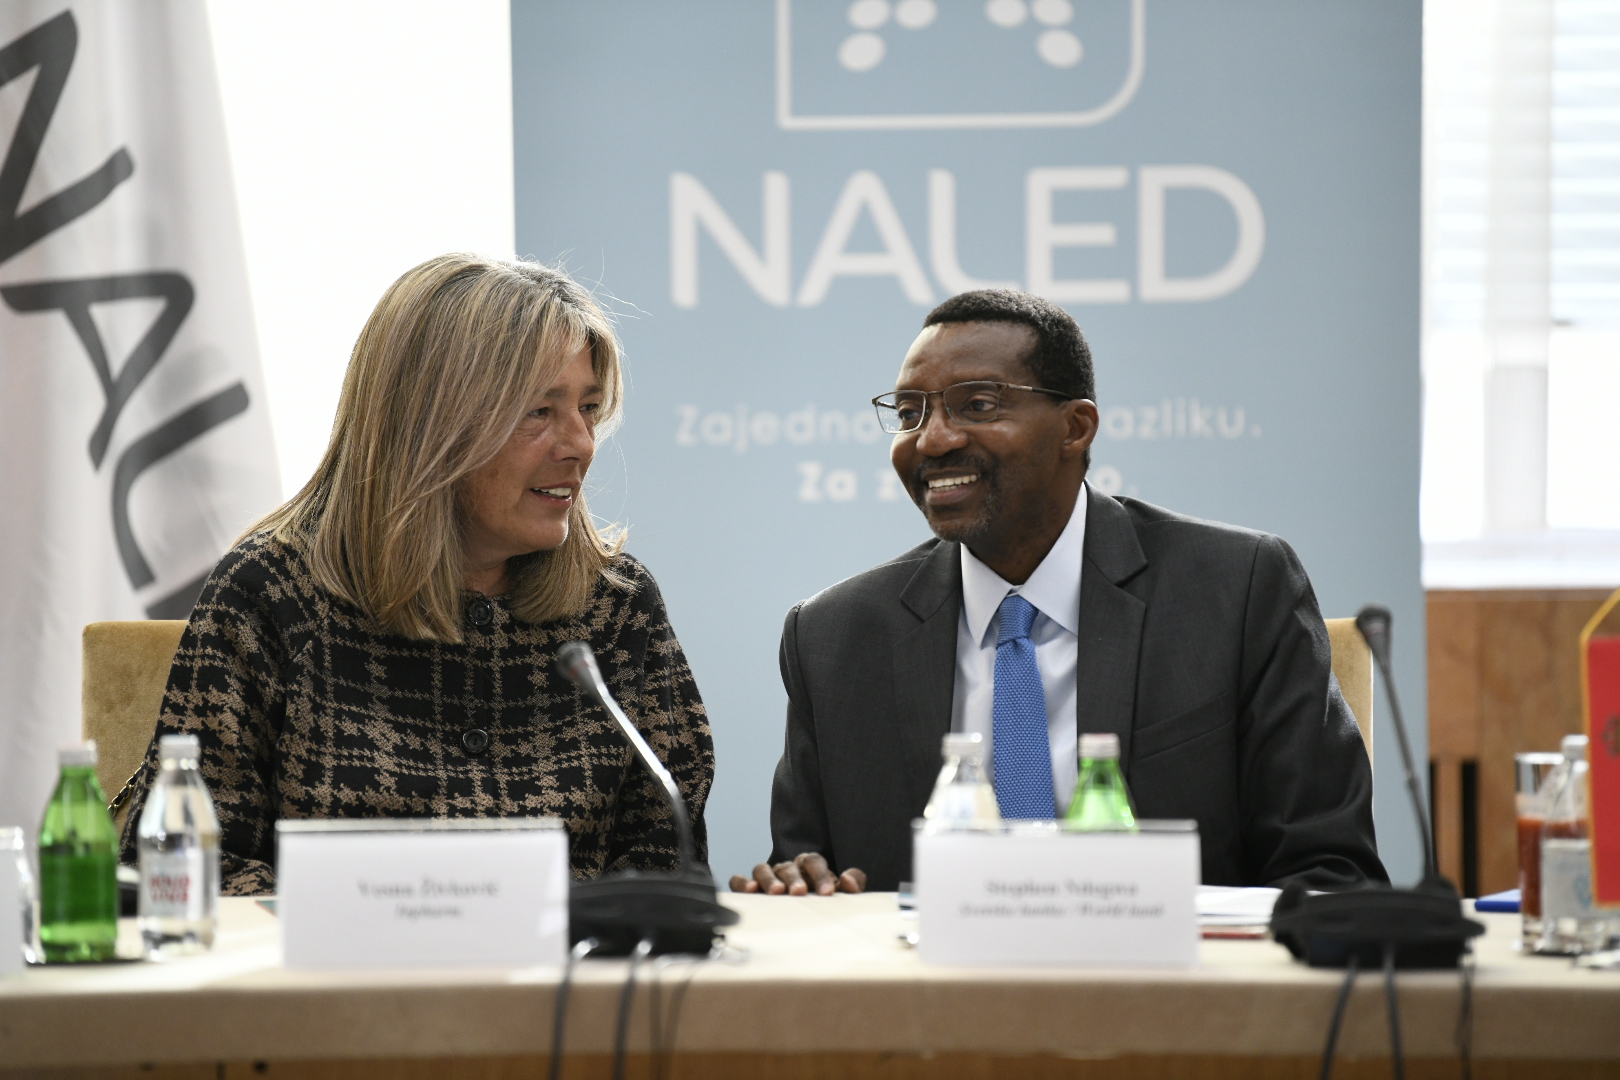 NALED presented 50 recommendations for more efficient healthcare